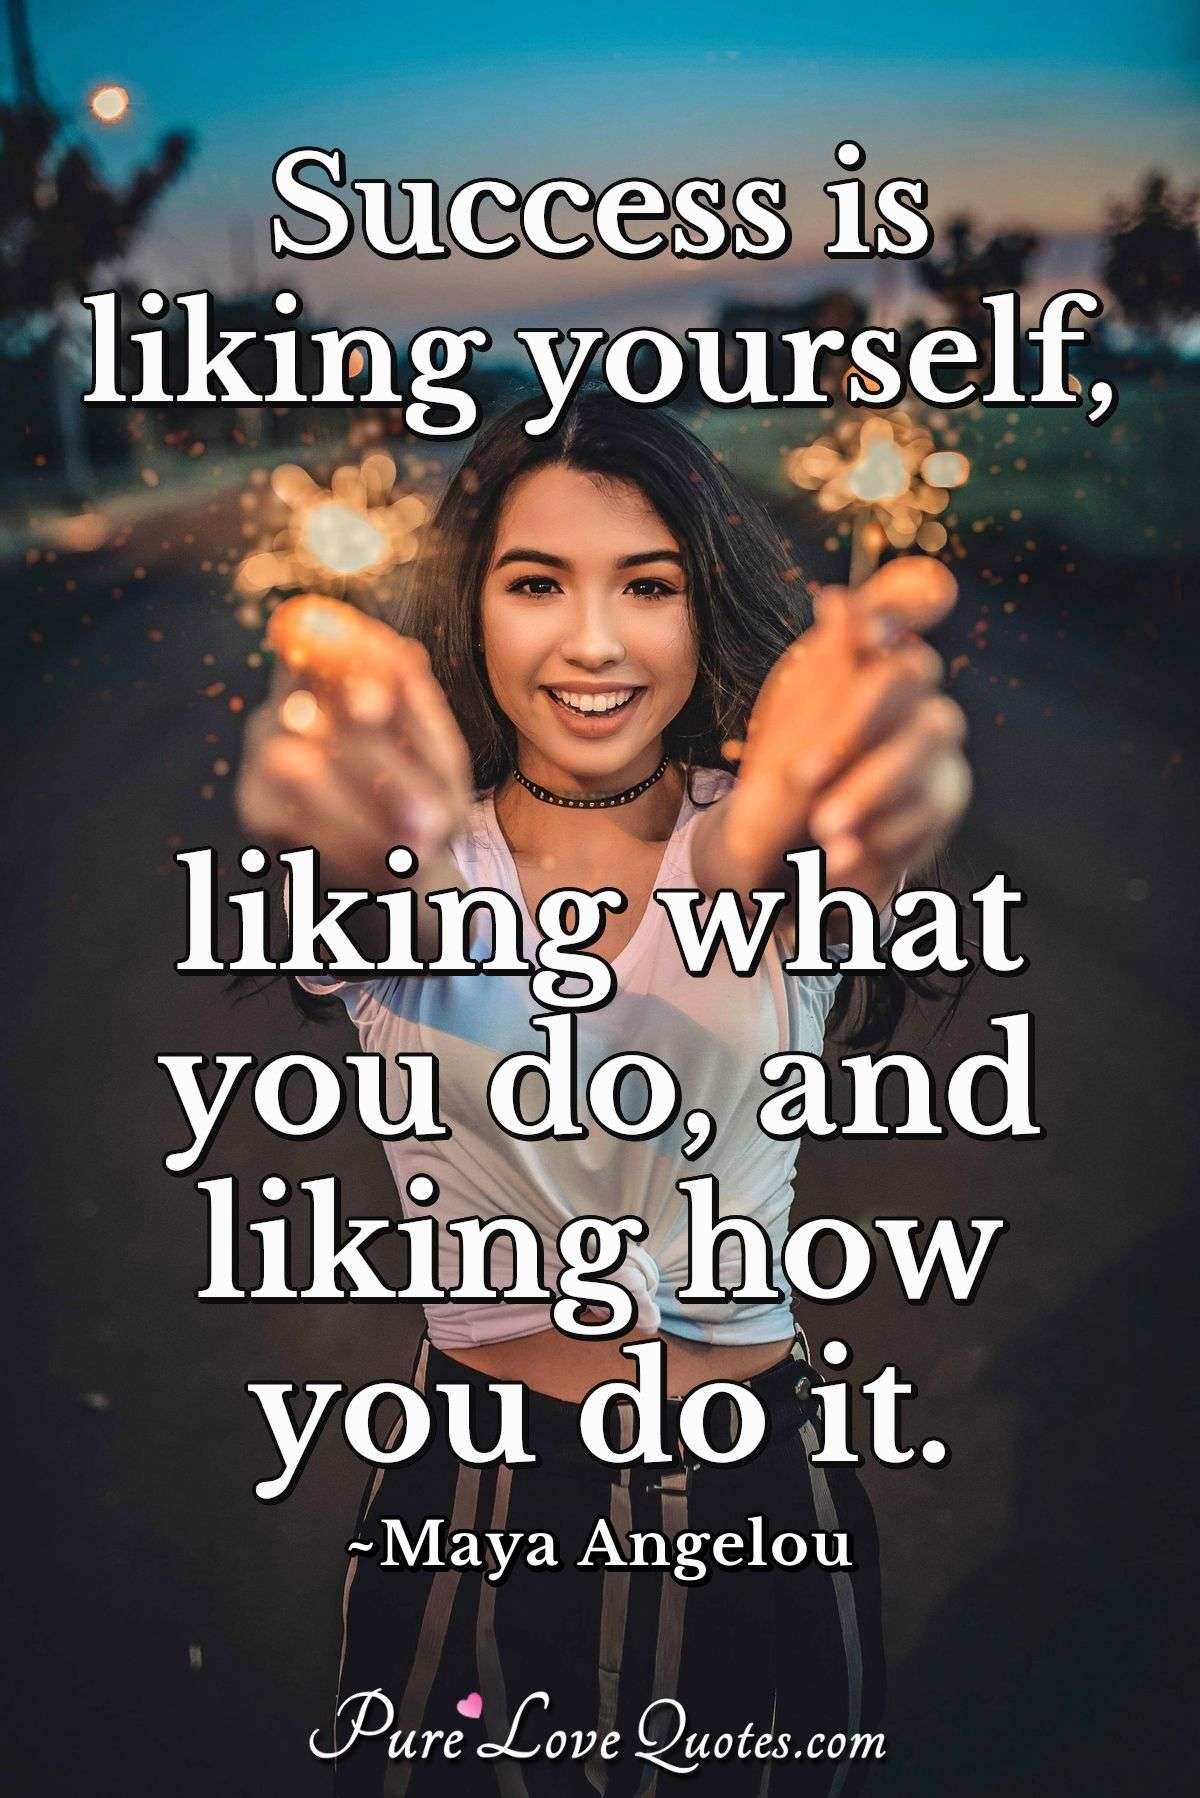 Success is liking yourself, liking what you do, and liking how you do it. - Maya Angelou